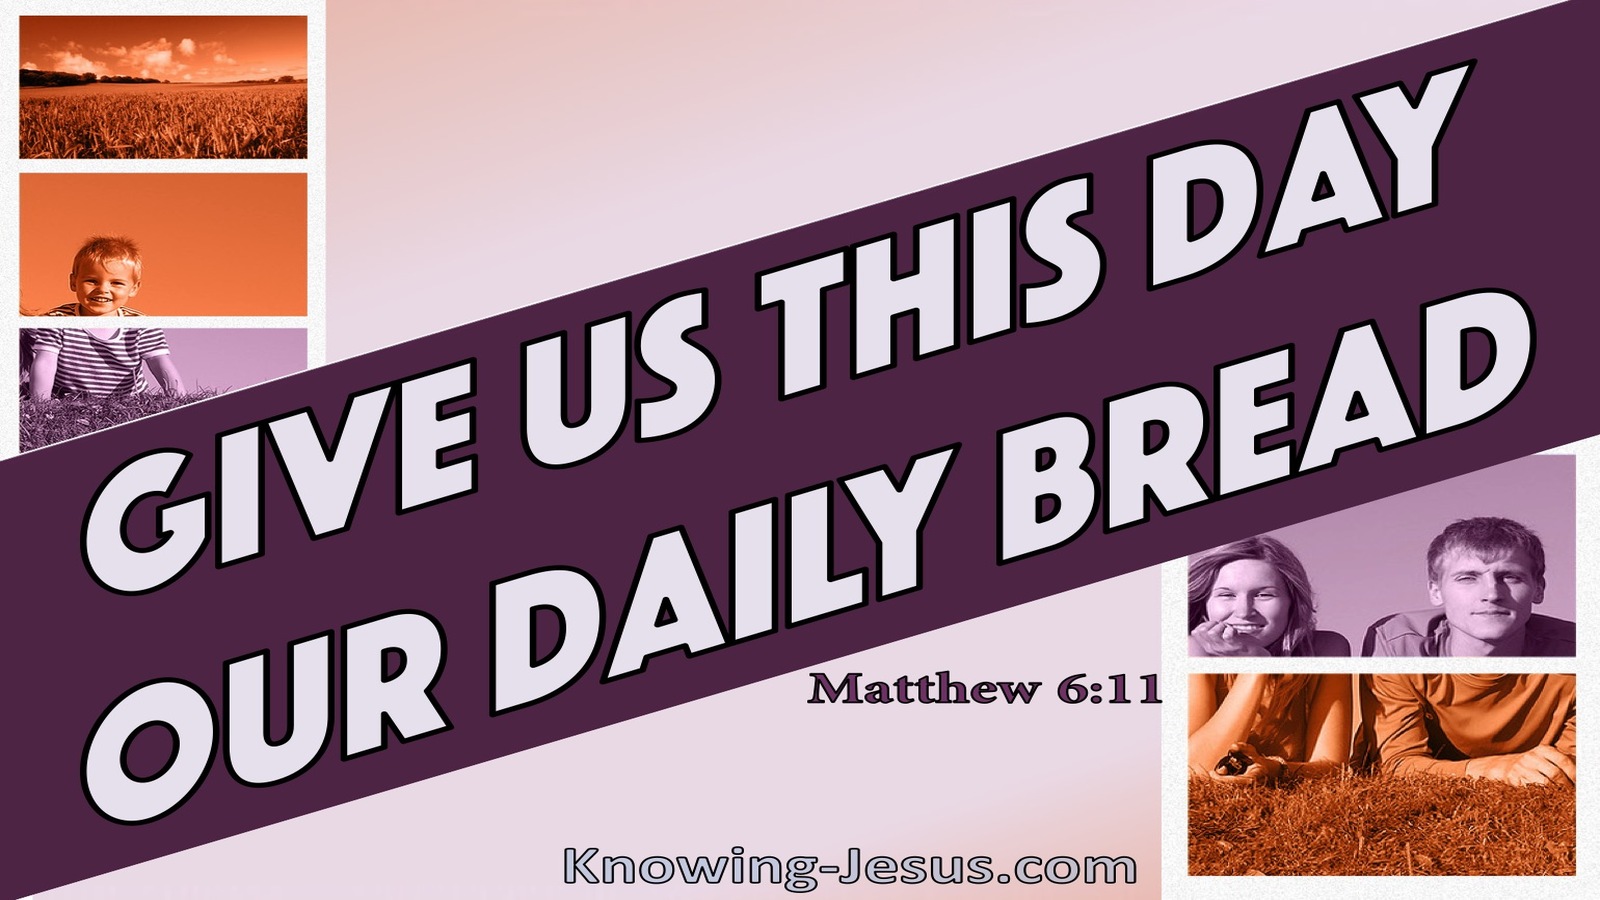 Matthew 6:11 Give Us This Day Our Daily Bread (purple)